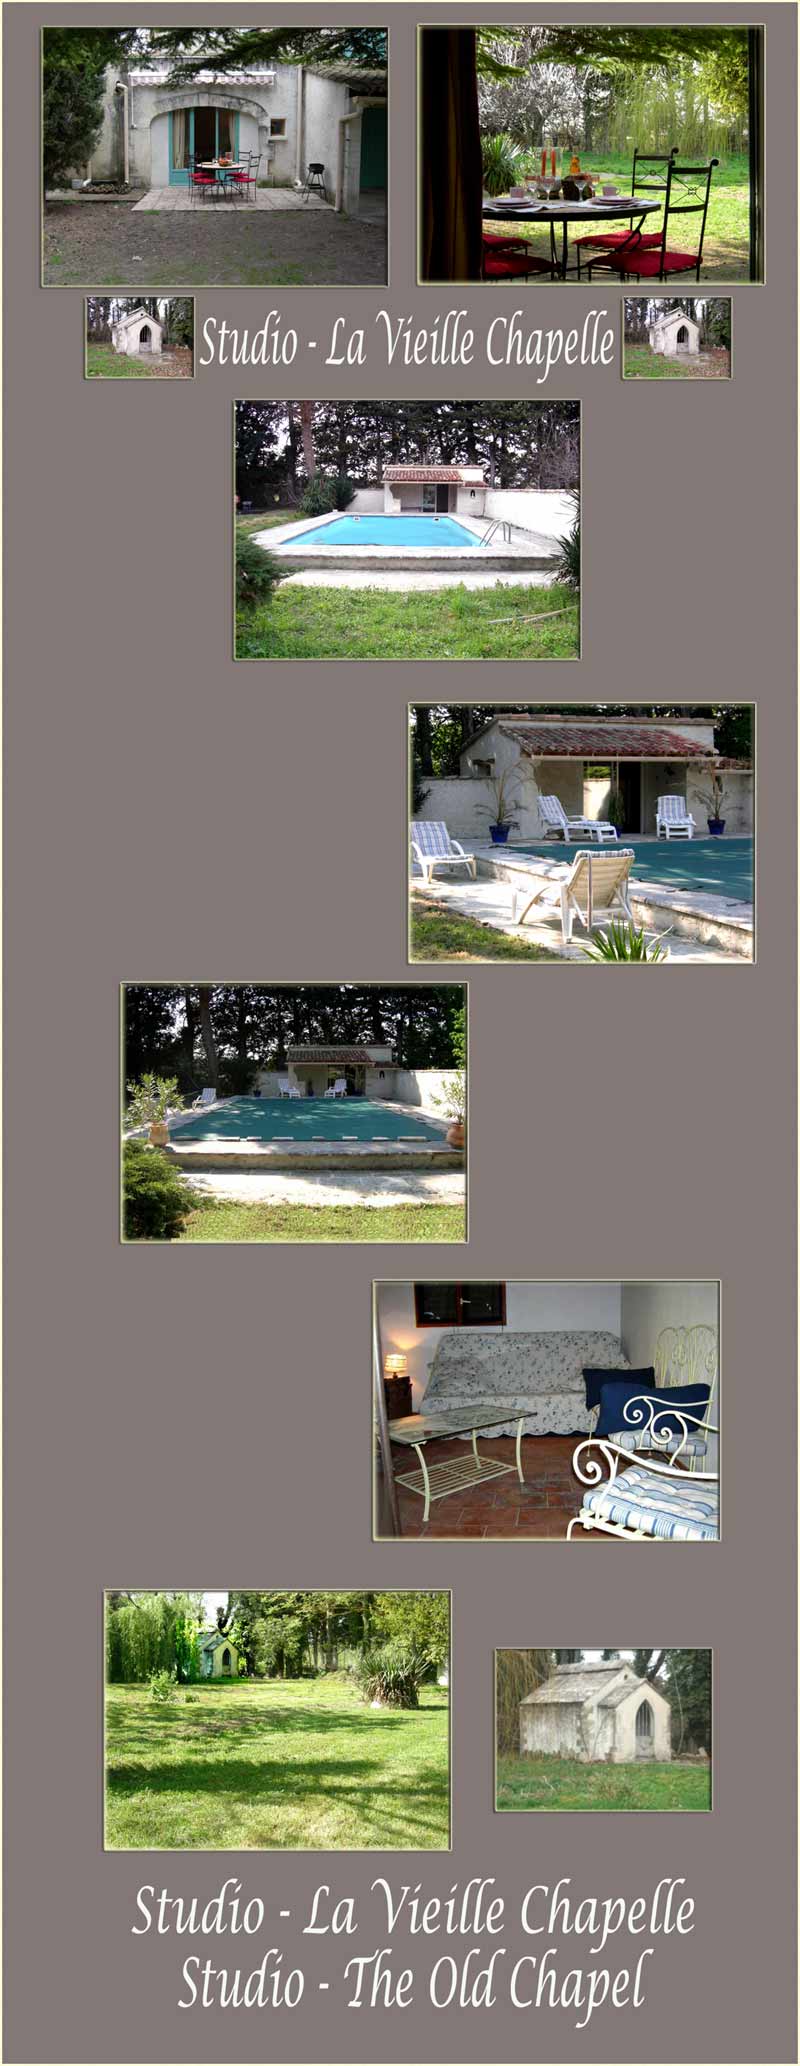 Provence studio with pool, old chapel, horses, bicycles, adjacent tennis, almond trees, plus - large pool, pool house, pool furniture